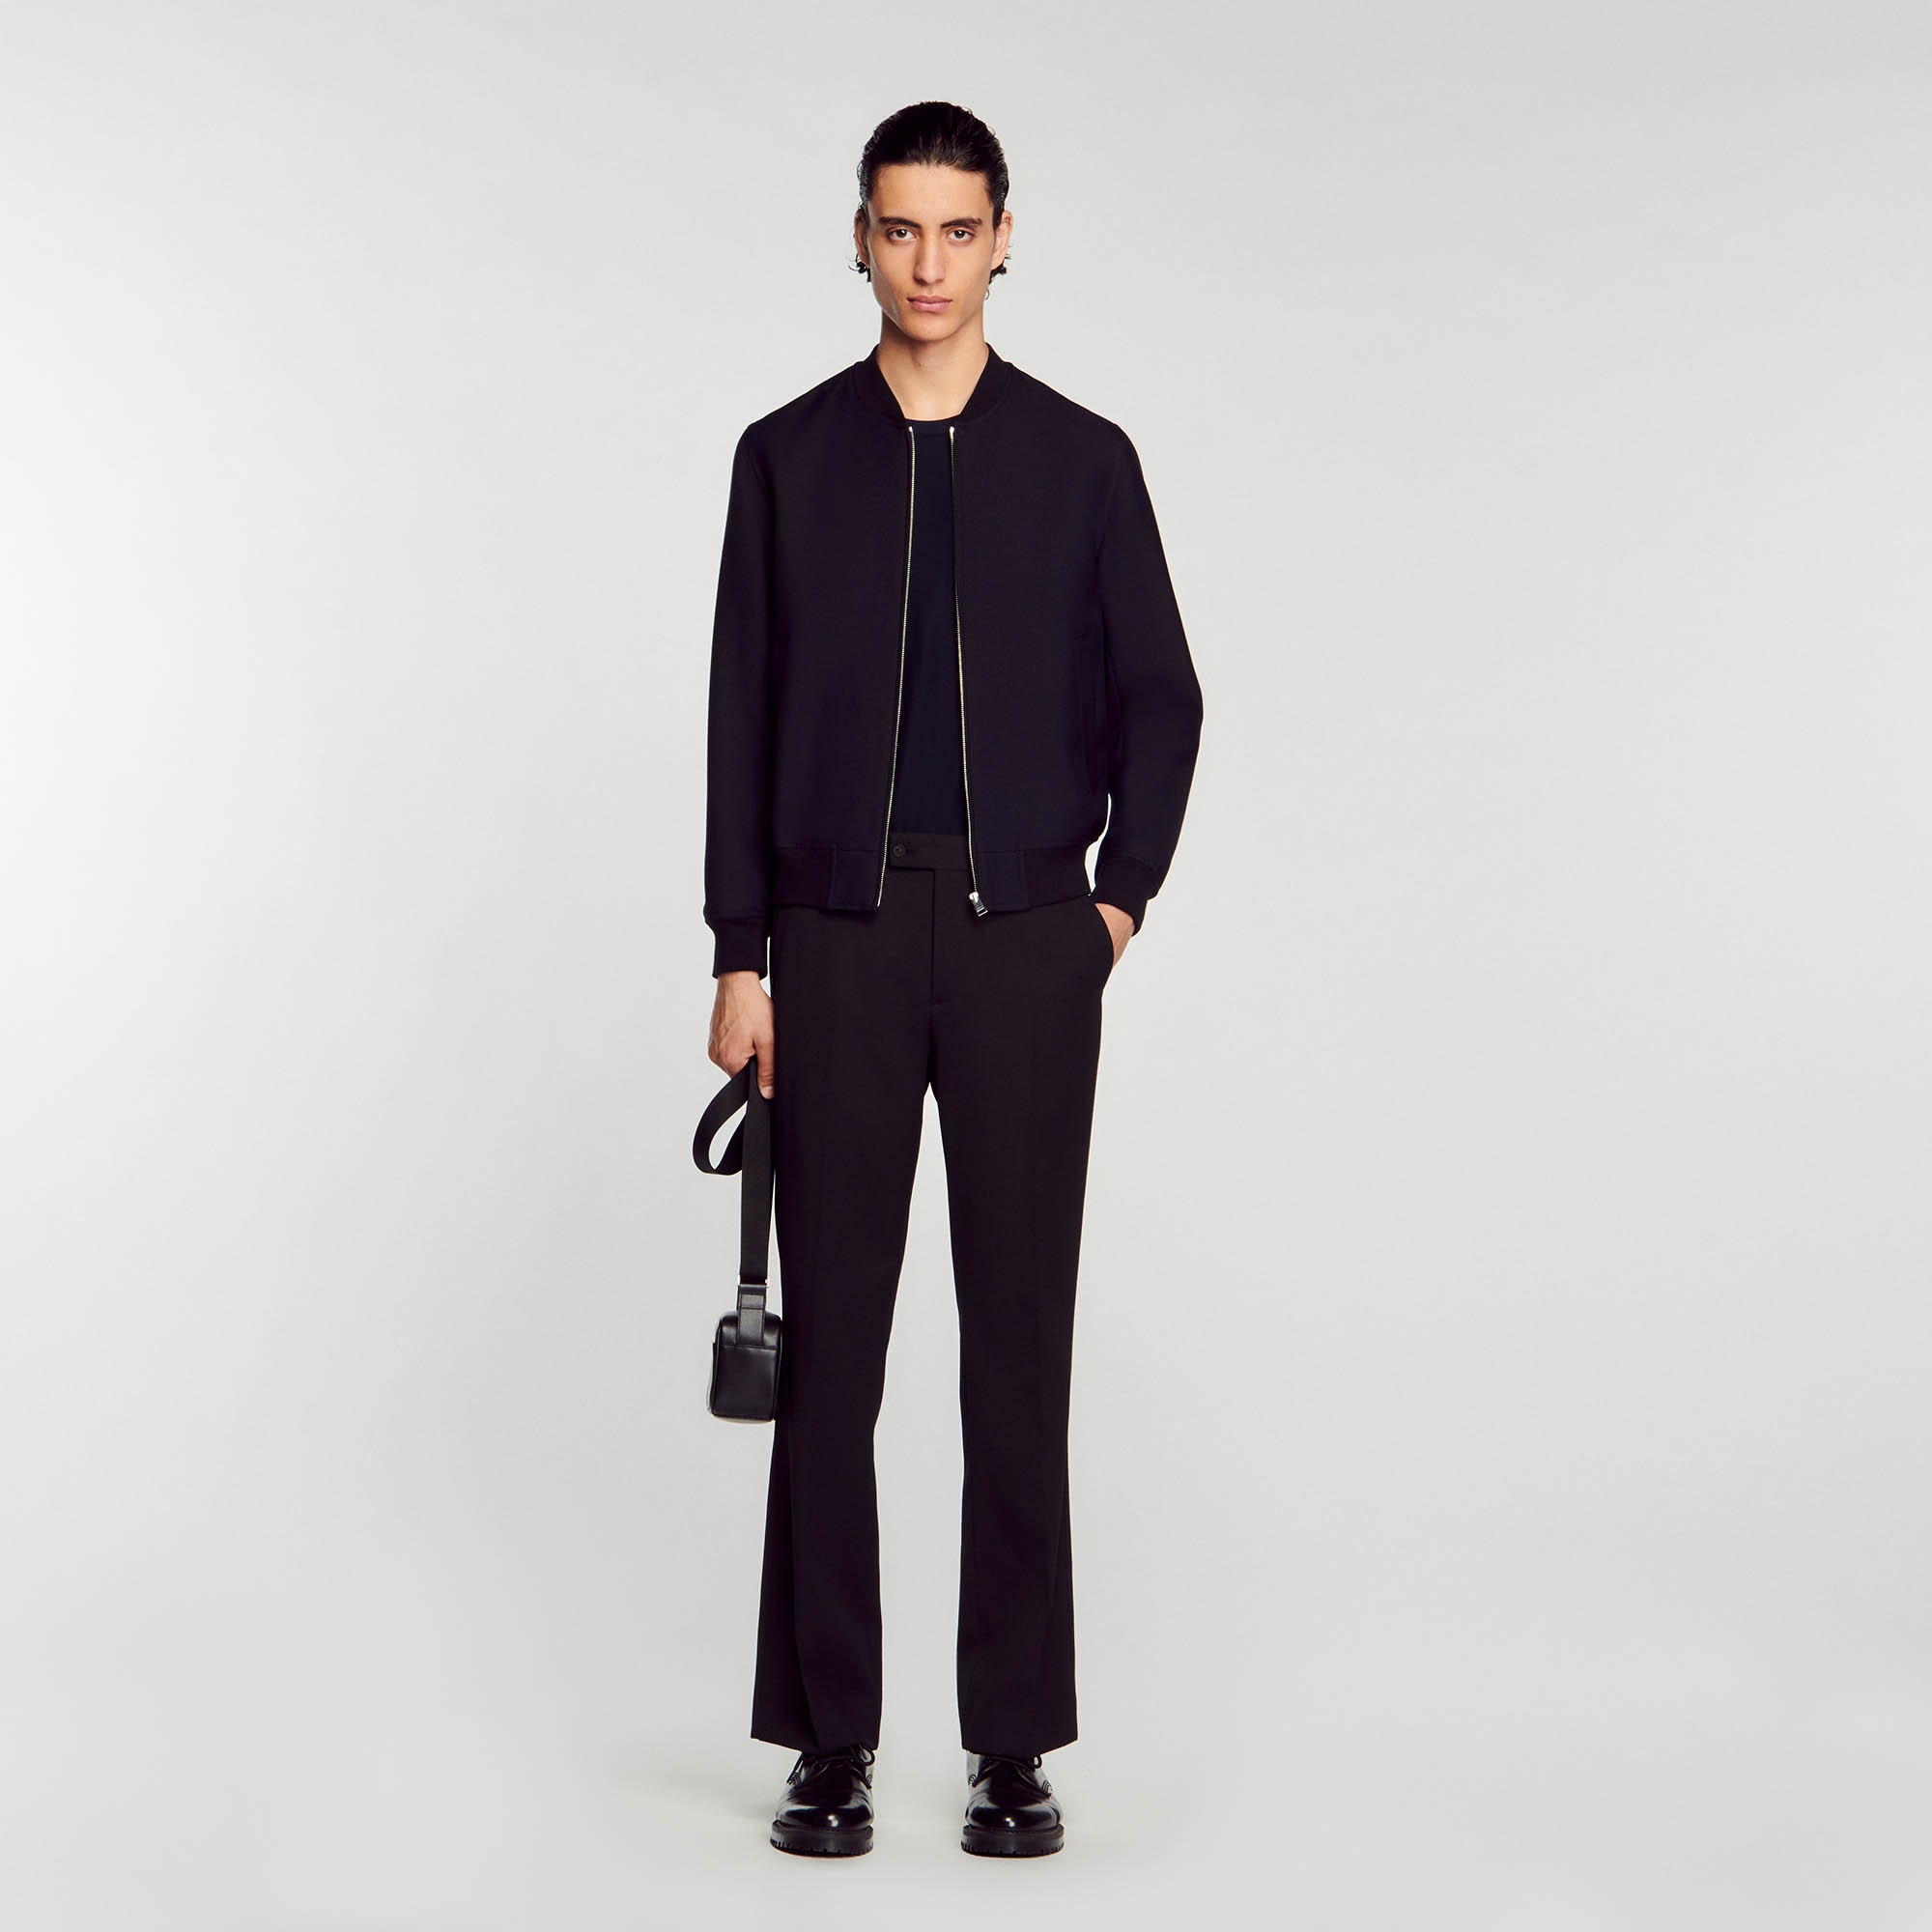 Sandro wool Varsity jacket in wool serge with a zip fastening and a ribbed collar, cuffs and waist